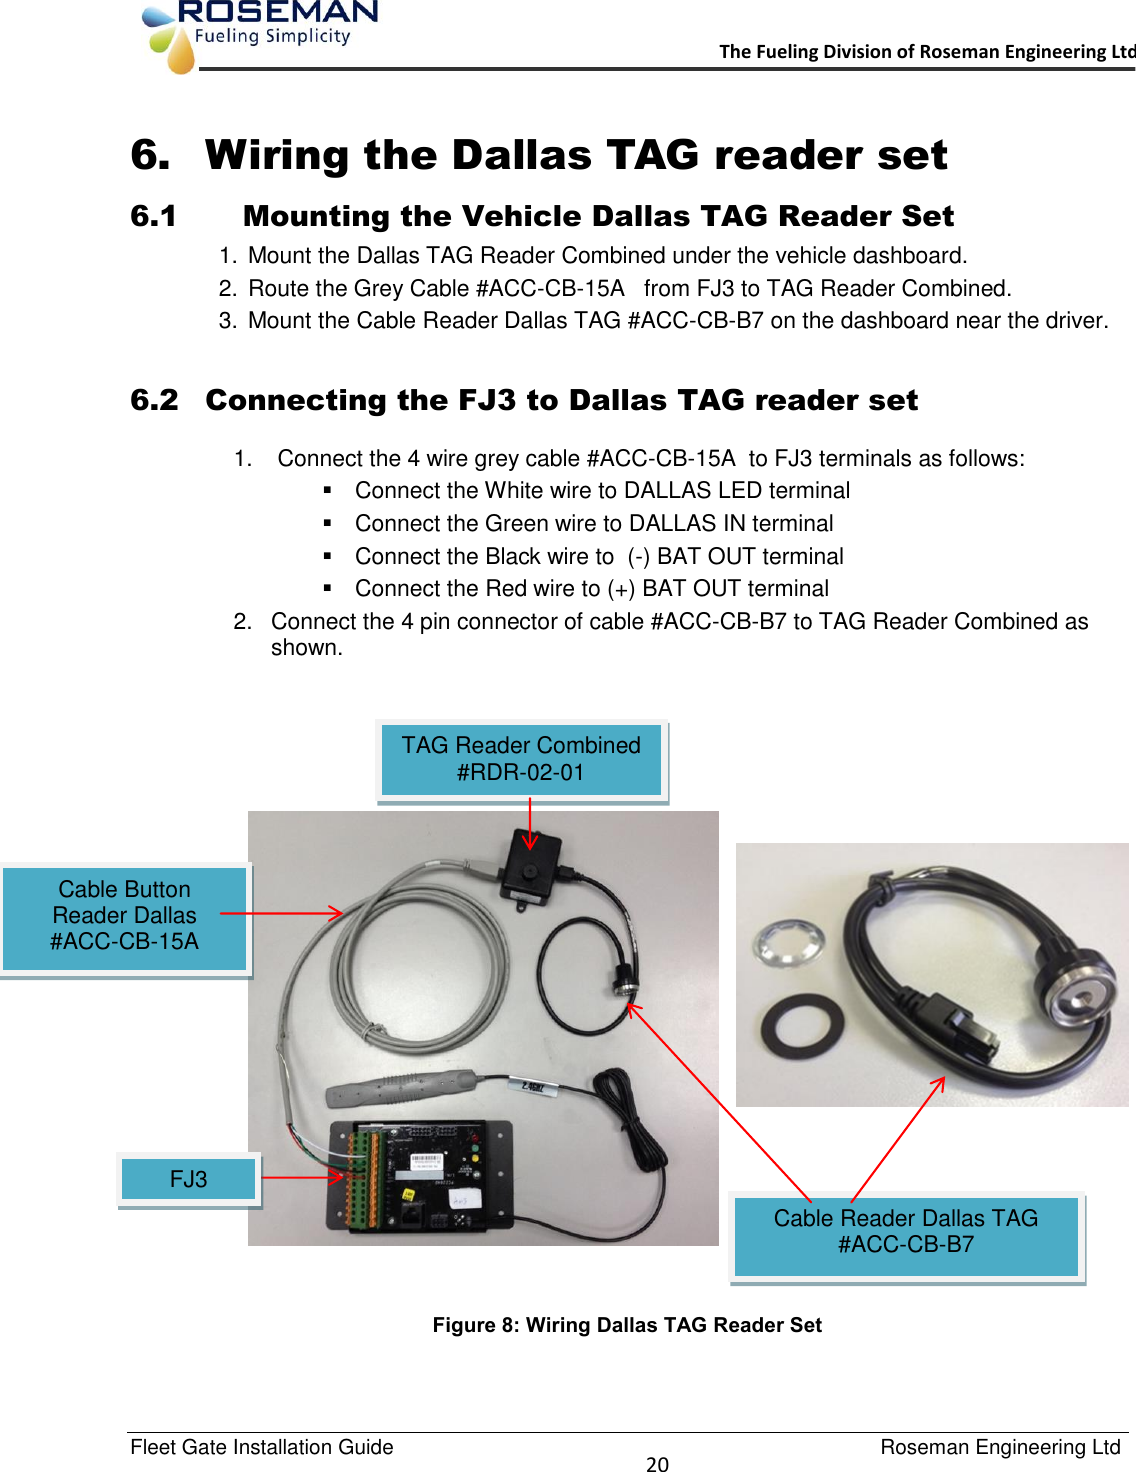   Fleet Gate Installation Guide                                                                                    Roseman Engineering Ltd  20      The Fueling Division of Roseman Engineering Ltd.                                                                 6. Wiring the Dallas TAG reader set  6.1 Mounting the Vehicle Dallas TAG Reader Set 1.  Mount the Dallas TAG Reader Combined under the vehicle dashboard. 2.  Route the Grey Cable #ACC-CB-15A   from FJ3 to TAG Reader Combined. 3.  Mount the Cable Reader Dallas TAG #ACC-CB-B7 on the dashboard near the driver.   6.2 Connecting the FJ3 to Dallas TAG reader set 1.   Connect the 4 wire grey cable #ACC-CB-15A  to FJ3 terminals as follows:   Connect the White wire to DALLAS LED terminal   Connect the Green wire to DALLAS IN terminal   Connect the Black wire to  (-) BAT OUT terminal    Connect the Red wire to (+) BAT OUT terminal 2.  Connect the 4 pin connector of cable #ACC-CB-B7 to TAG Reader Combined as shown.          Figure 8: Wiring Dallas TAG Reader Set  Cable Button Reader Dallas #ACC-CB-15A  Cable Reader Dallas TAG  #ACC-CB-B7  TAG Reader Combined #RDR-02-01  FJ3  